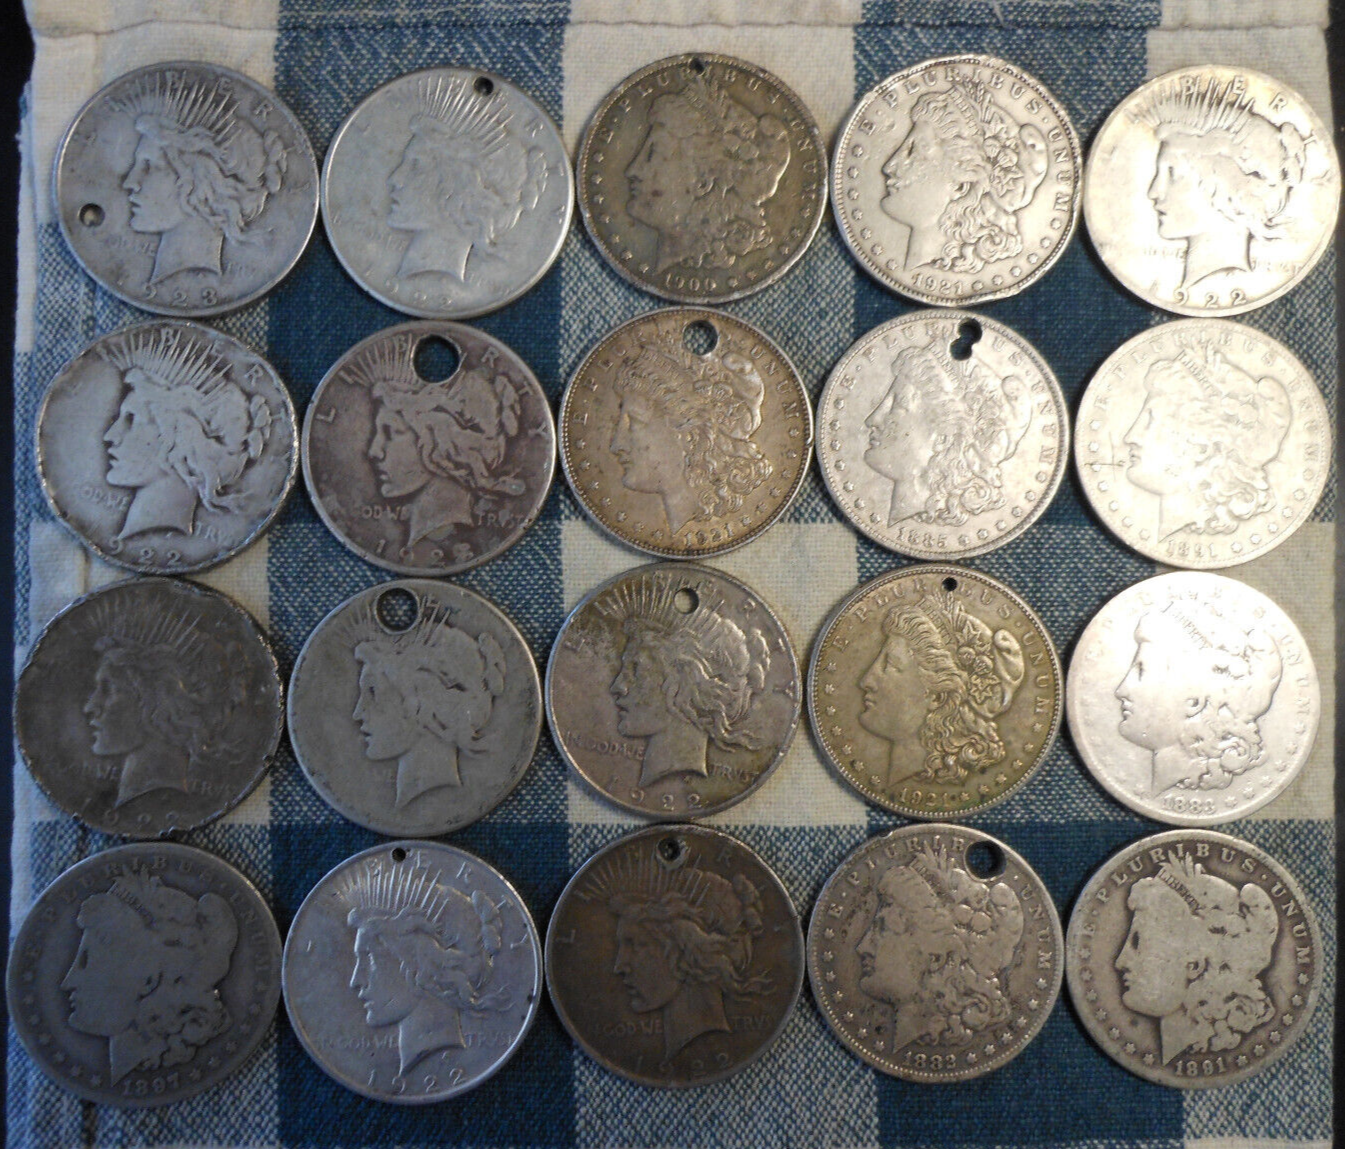 Primary image for ROLL OF 20 MORGAN & PEACE 90% JUNK SILVER DOLLARS DAMAGED POOR UGLY HOLED CULLS